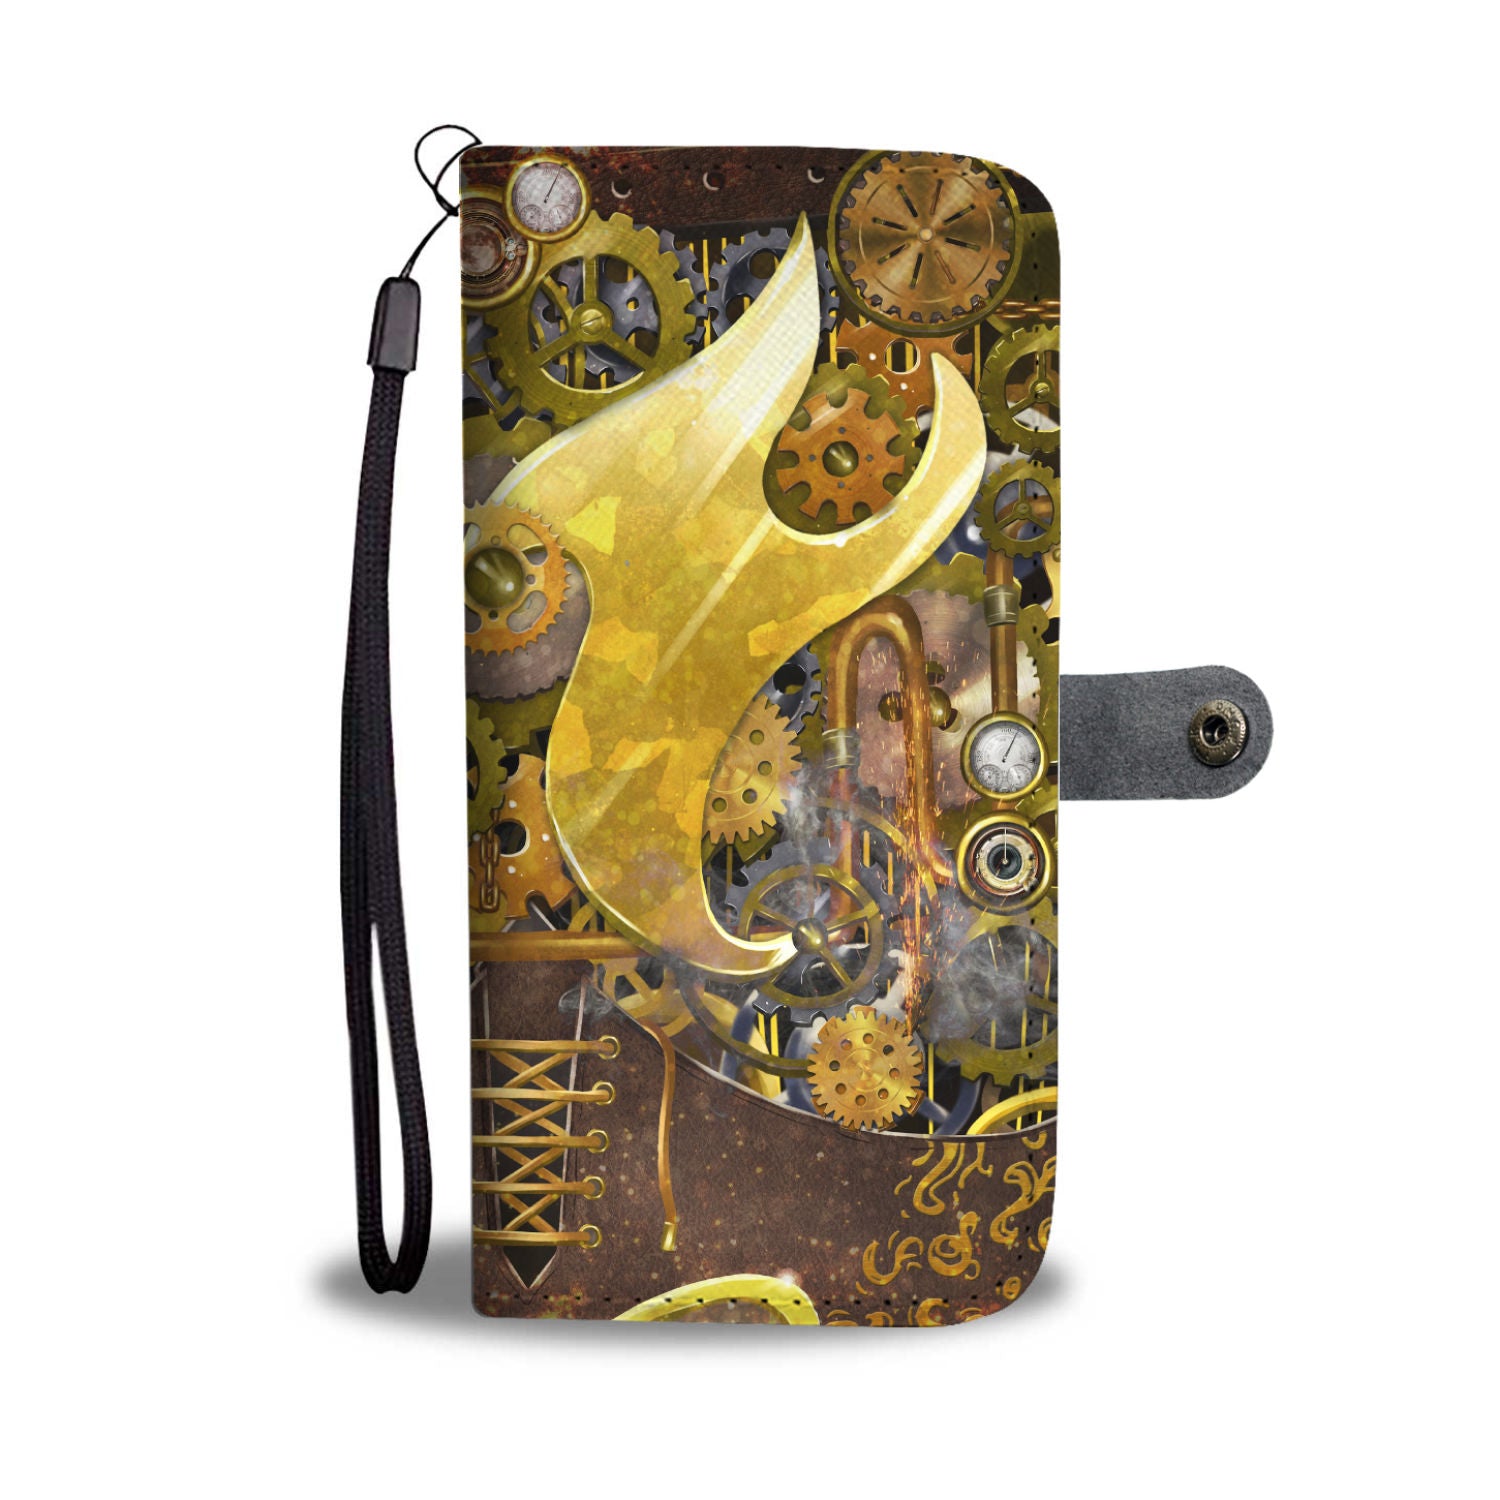 Classic Steampunk Phone Wallet